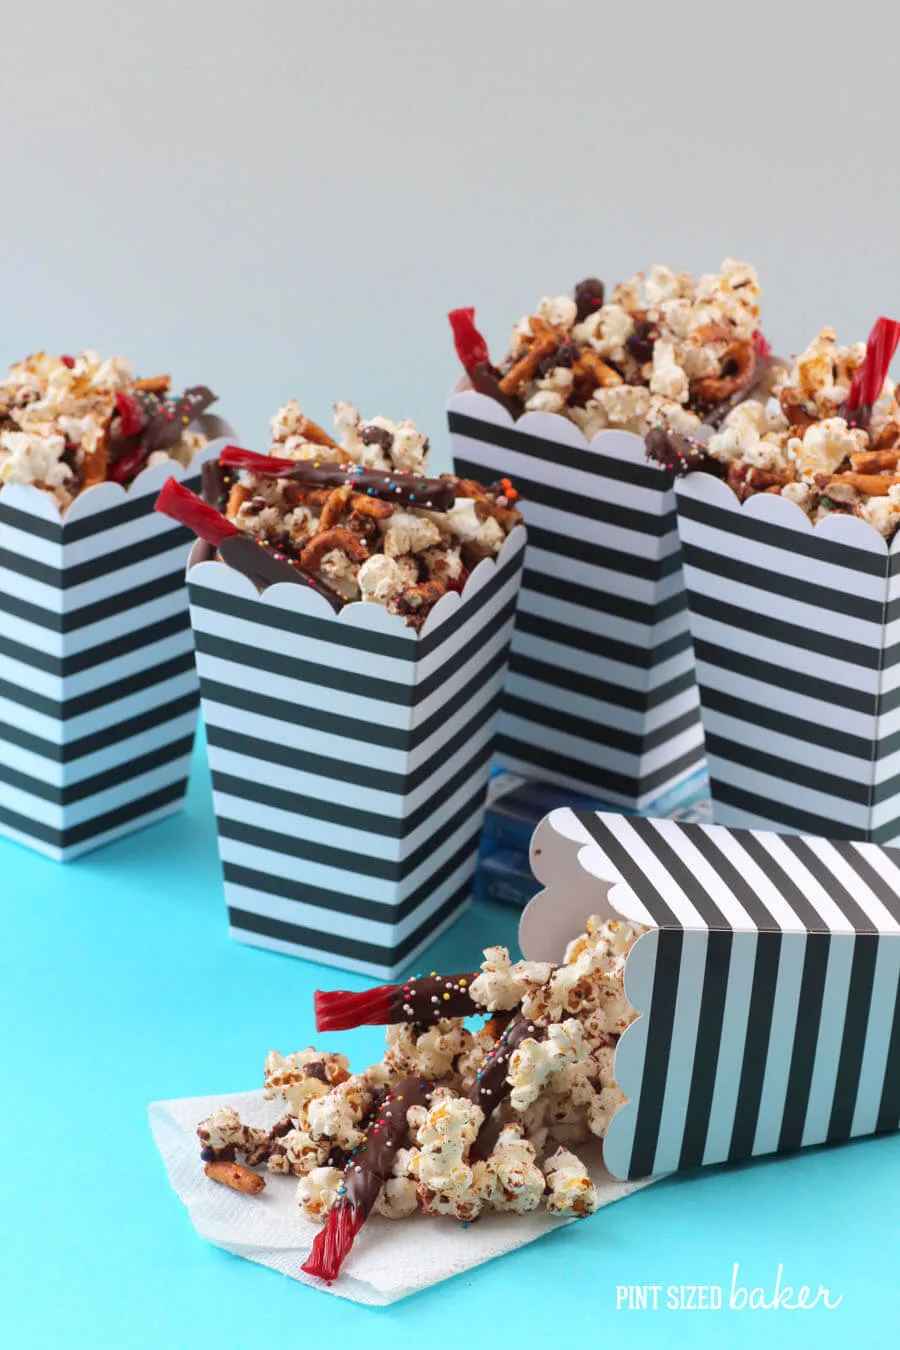 Grab the red whips and a movie - this popcorn has it ALL!